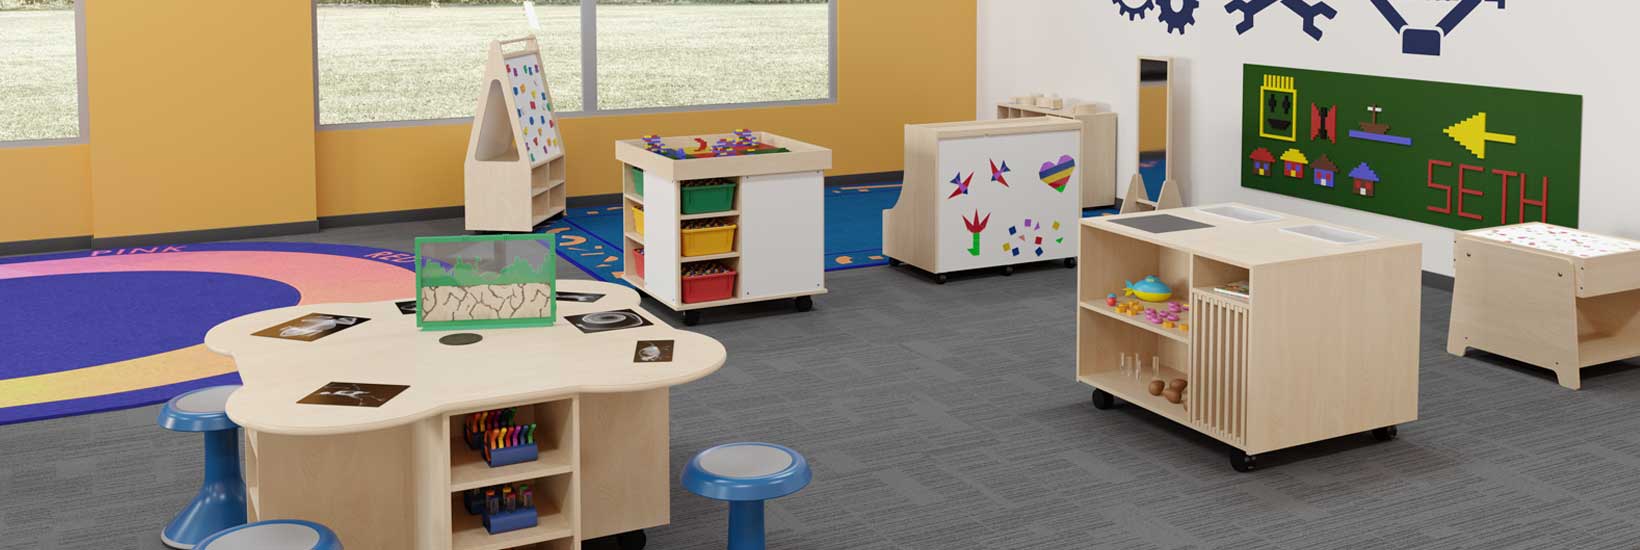 Early Childhood Makerspace Space View 2